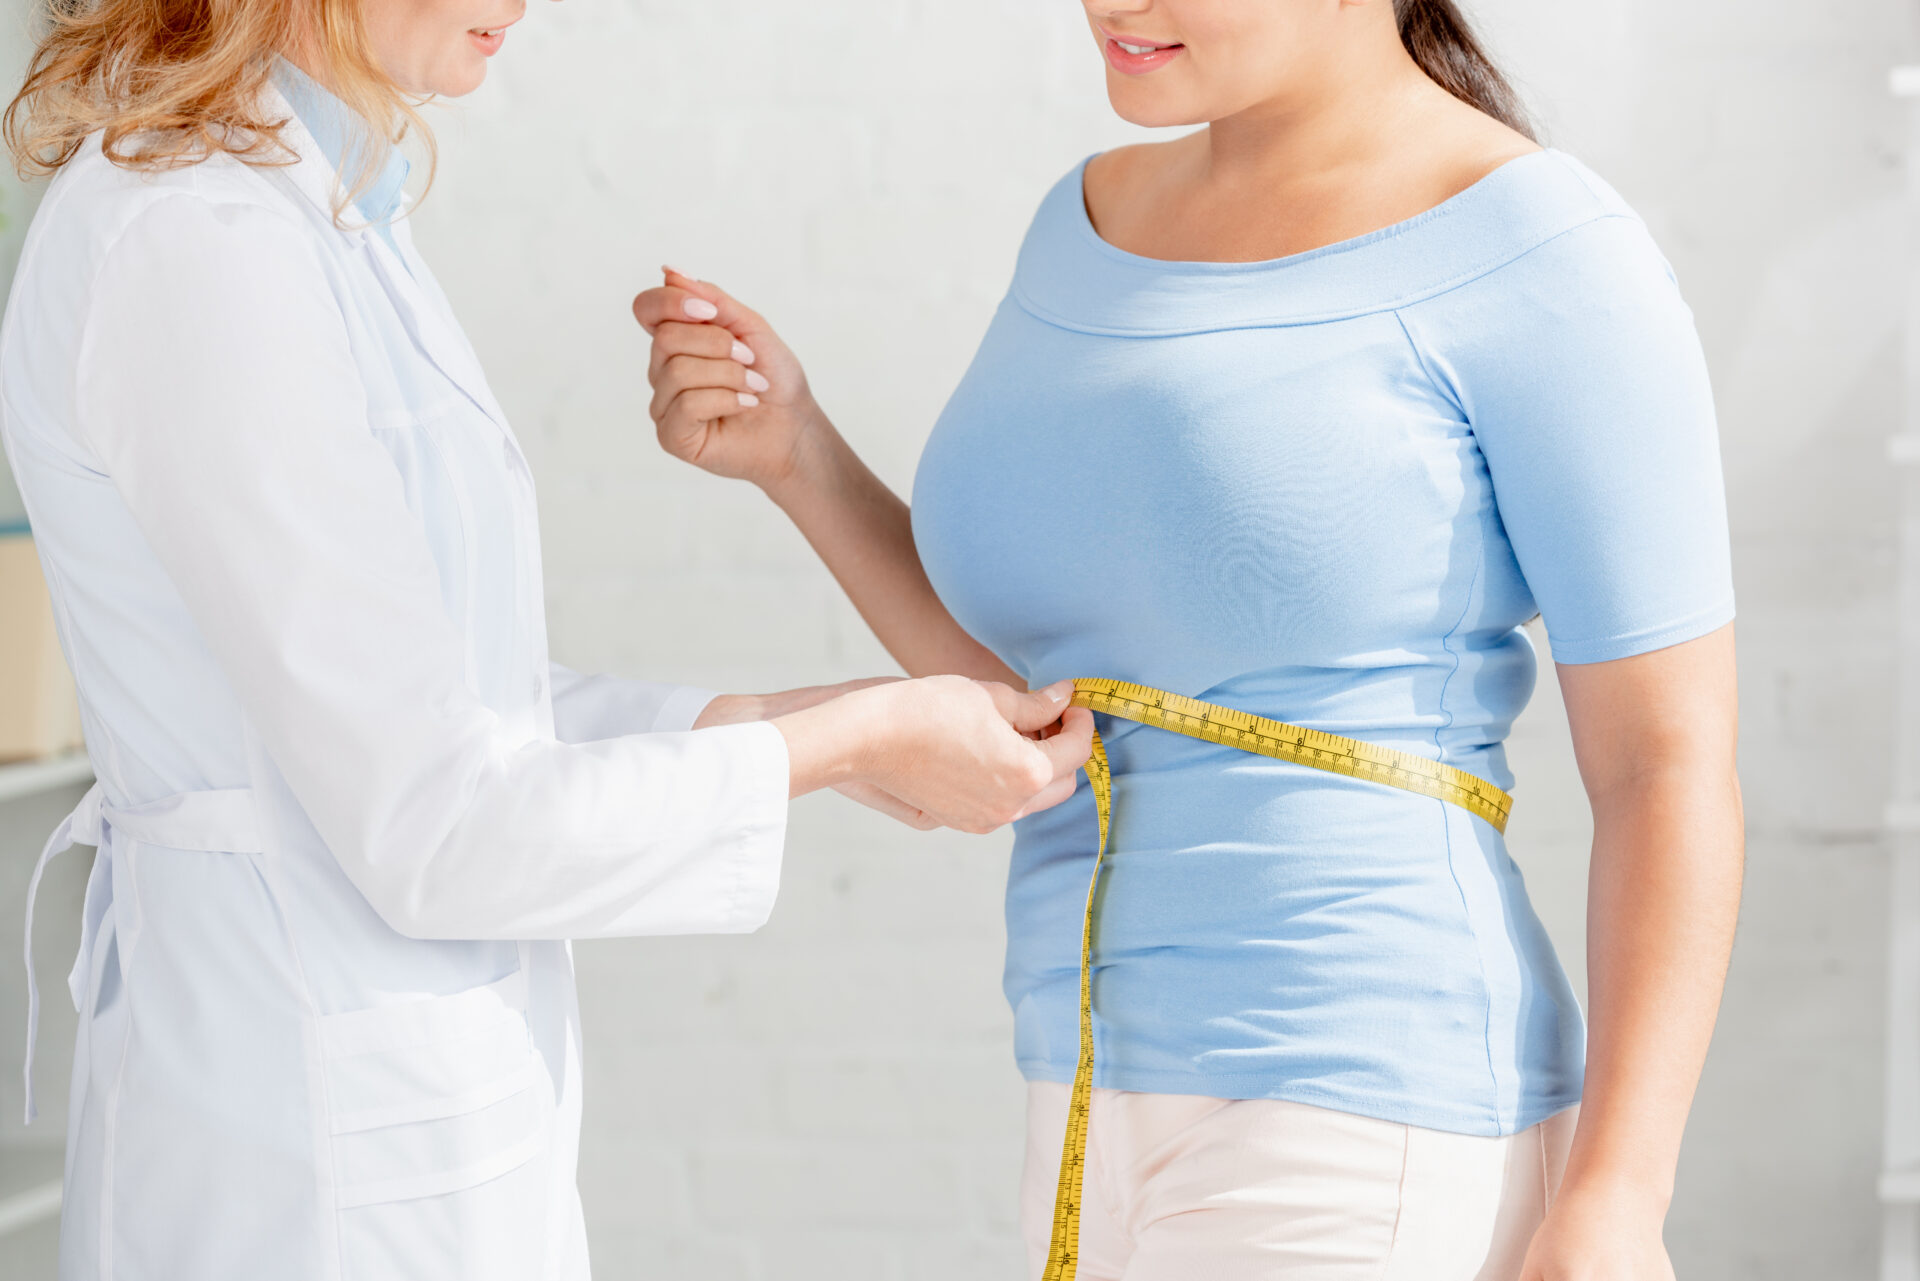 weight loss doctor measuring a patient’s waist, possible provider of red light therapy for weight loss